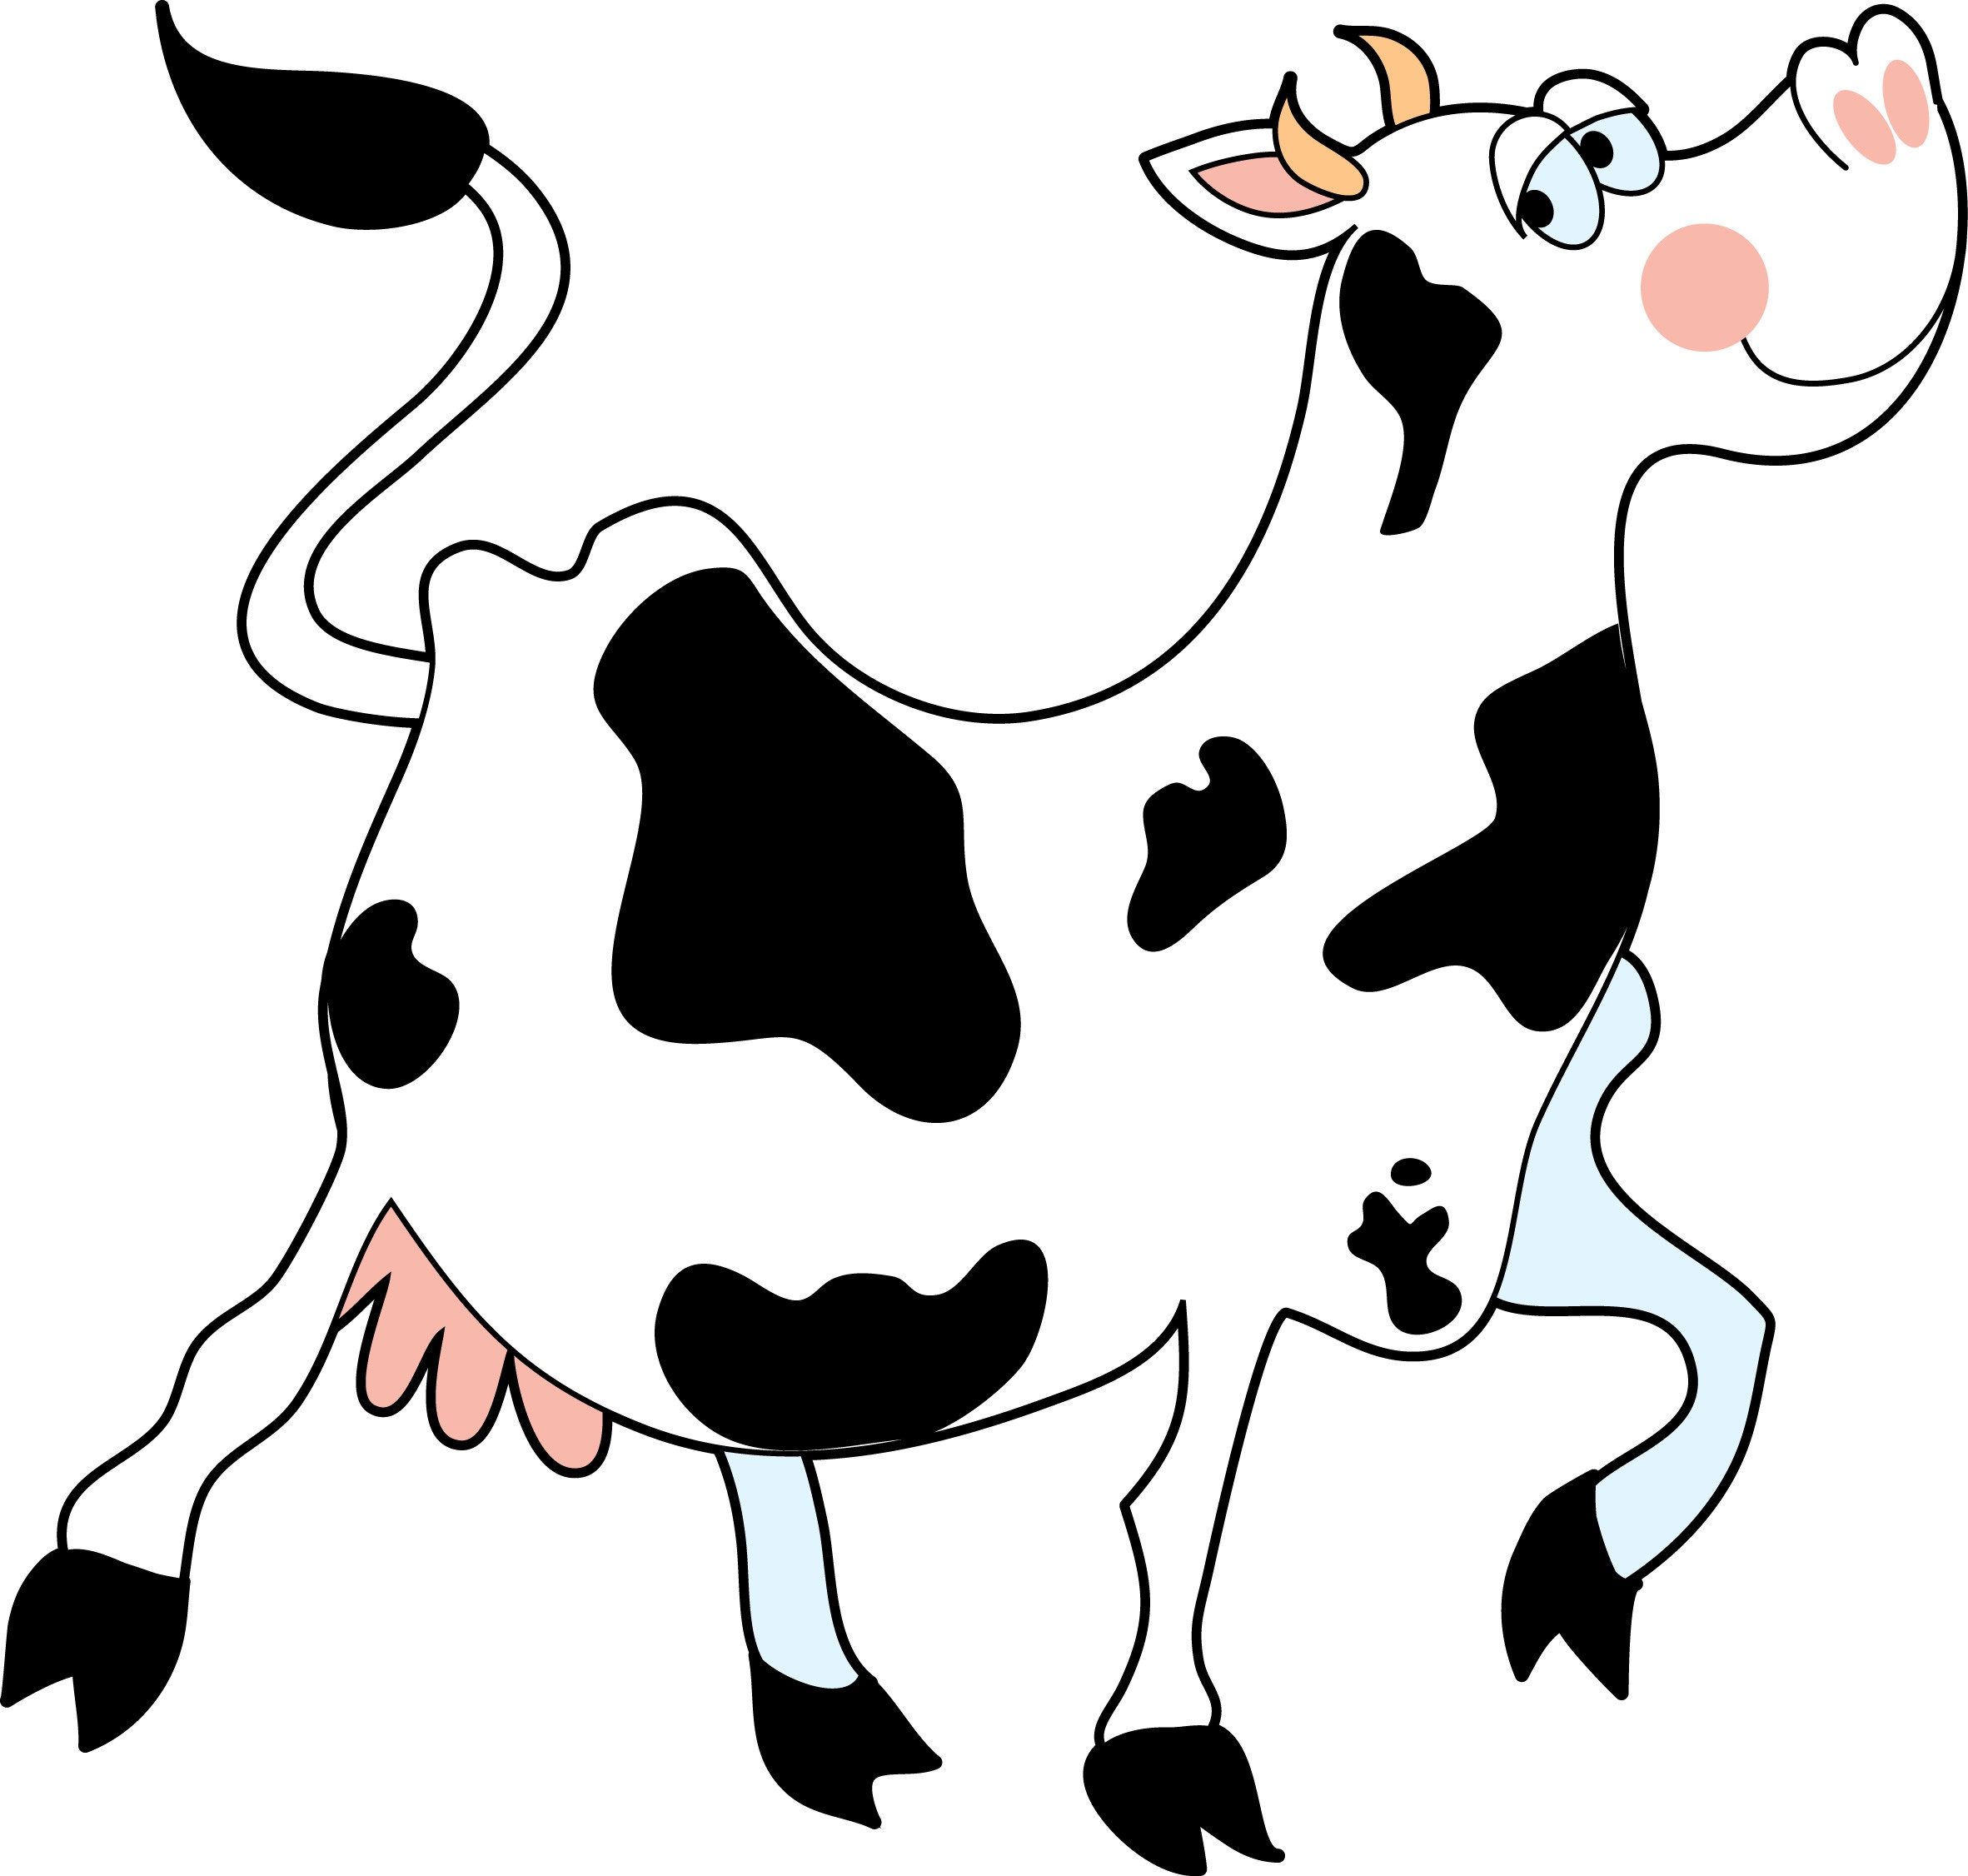 cow cdr clipart - photo #40